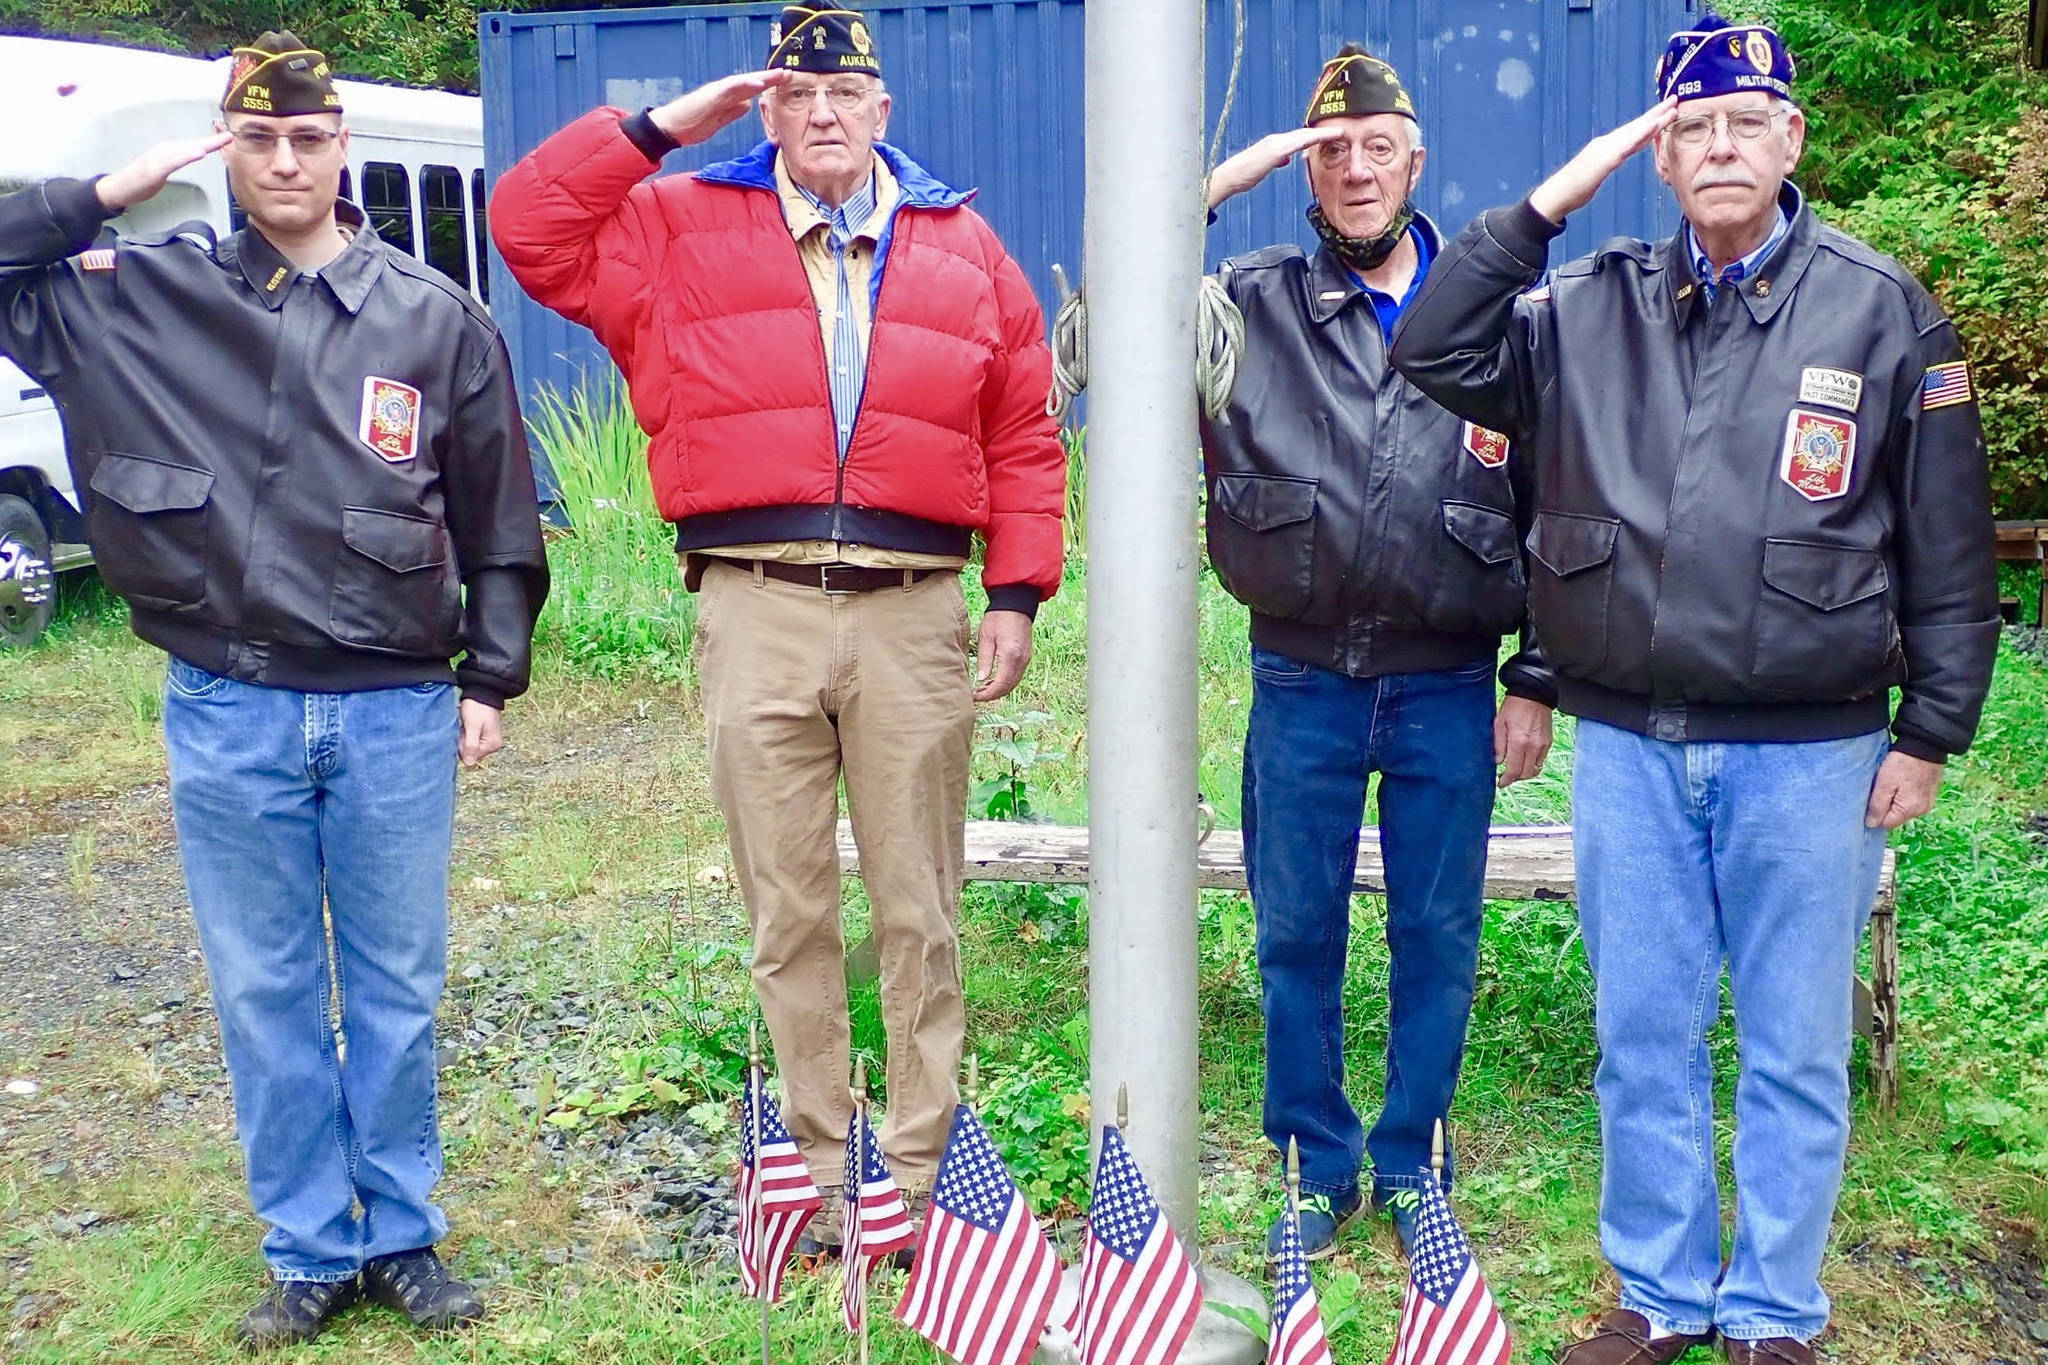 From left to right, Kirk Thorsteinson, Tom Dawson, Howard Colbert, and Tim Armstrong gather for Prisoner of War/Missing in Action Recognition Day at the American Legion Post in Juneau. The holiday us held on the third Friday of every September to remember the more than 81,900 missing American service members. (Courtesy photo / Tom Dawson)